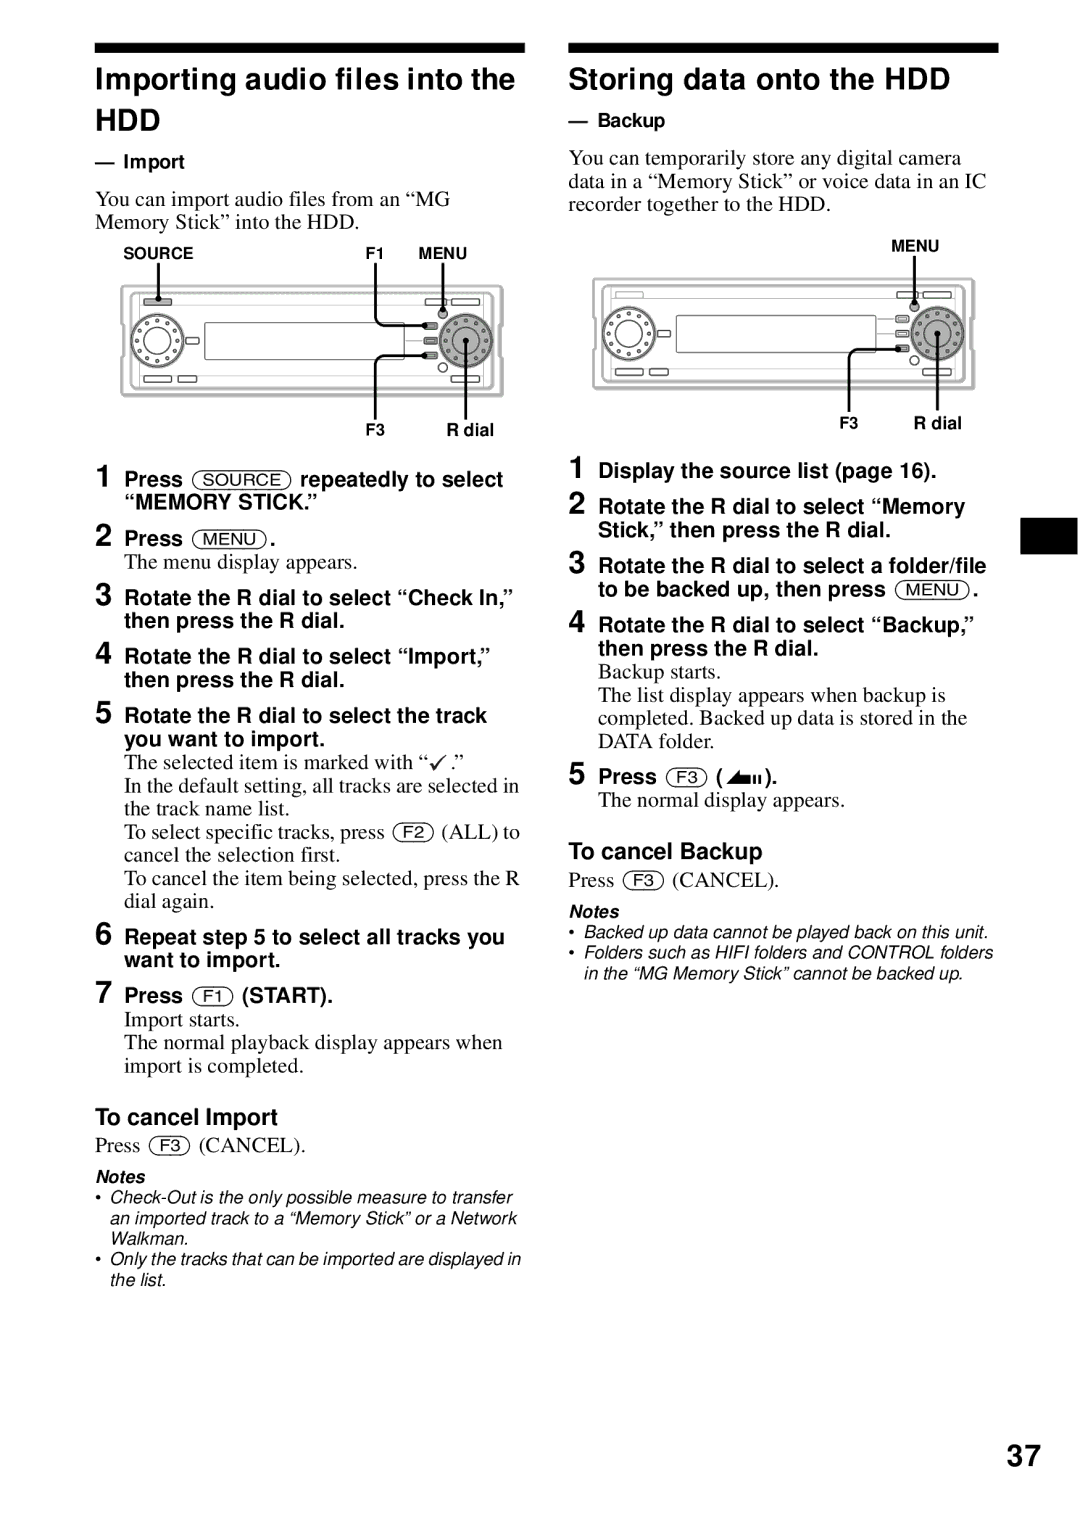 Sony MEX-1HD operating instructions Storing data onto the HDD, Importing audio files into 